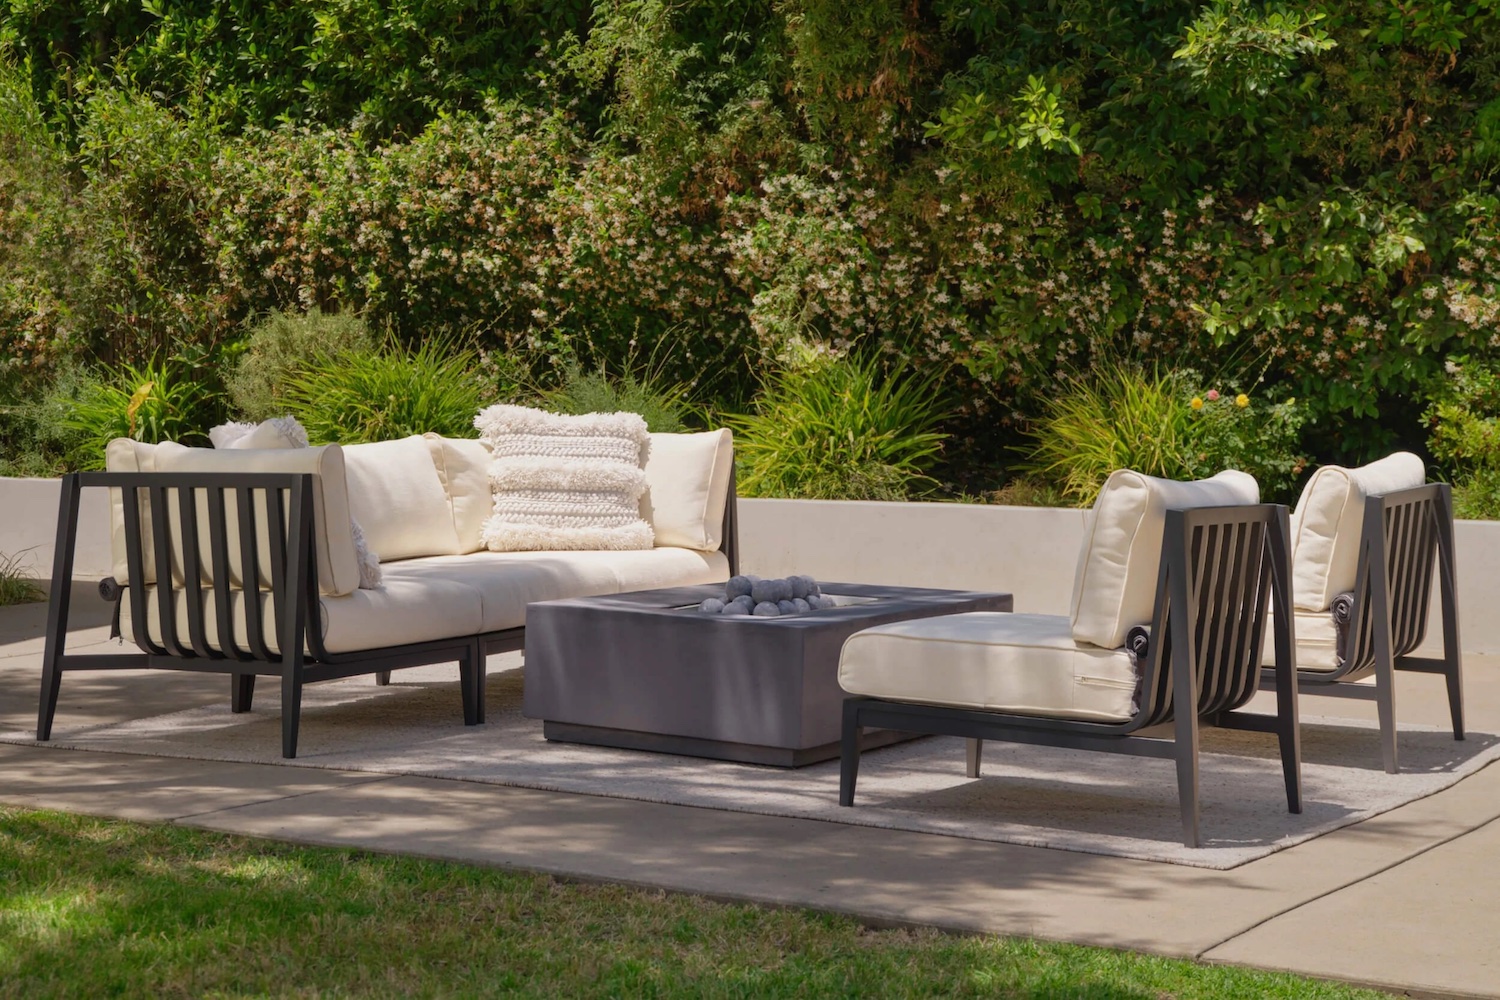 Aluminum Outer Outdoor Furniture Set in White around a fire pit